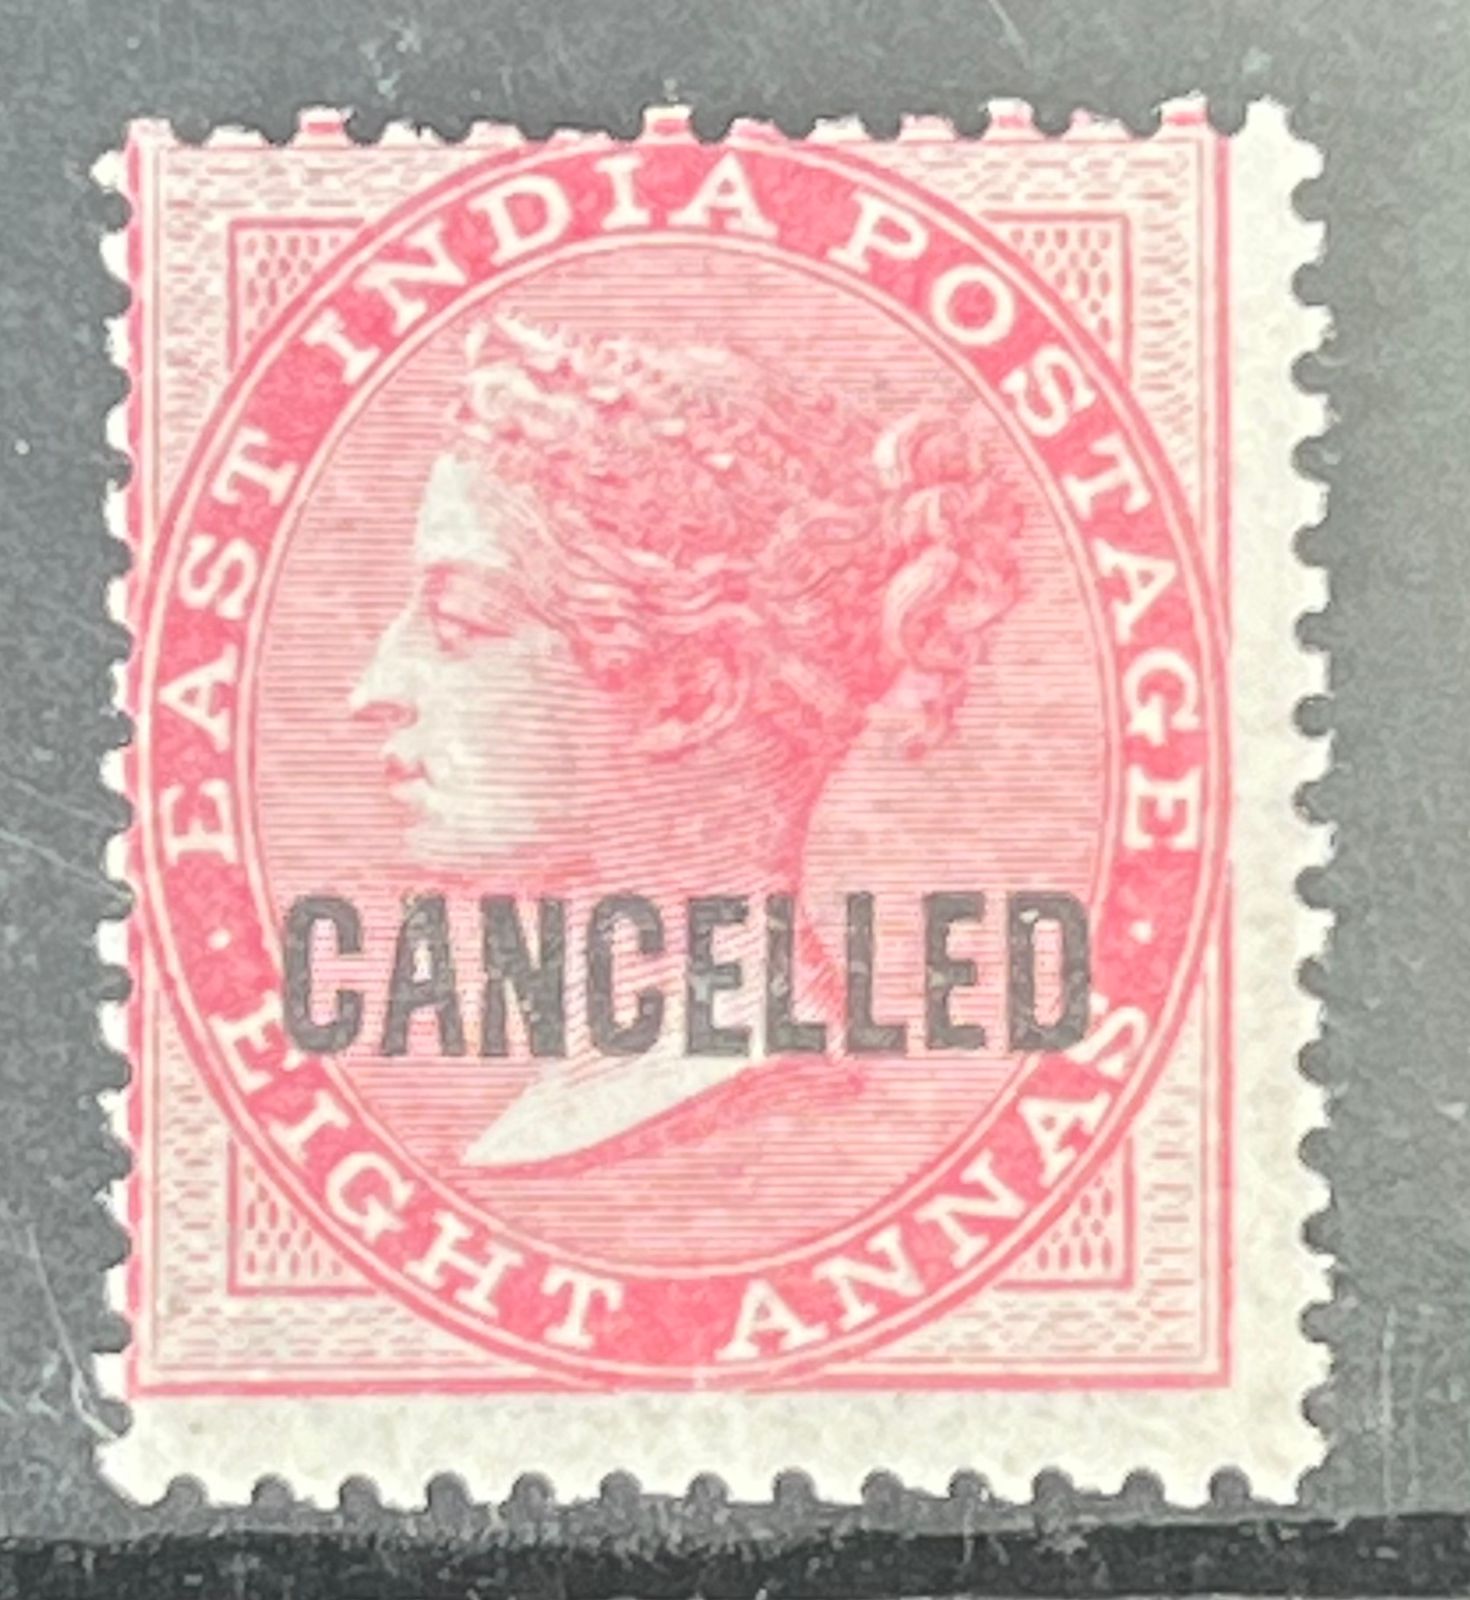 India 1873 QV East India Co 8a CANCELLED Overprint Scarce